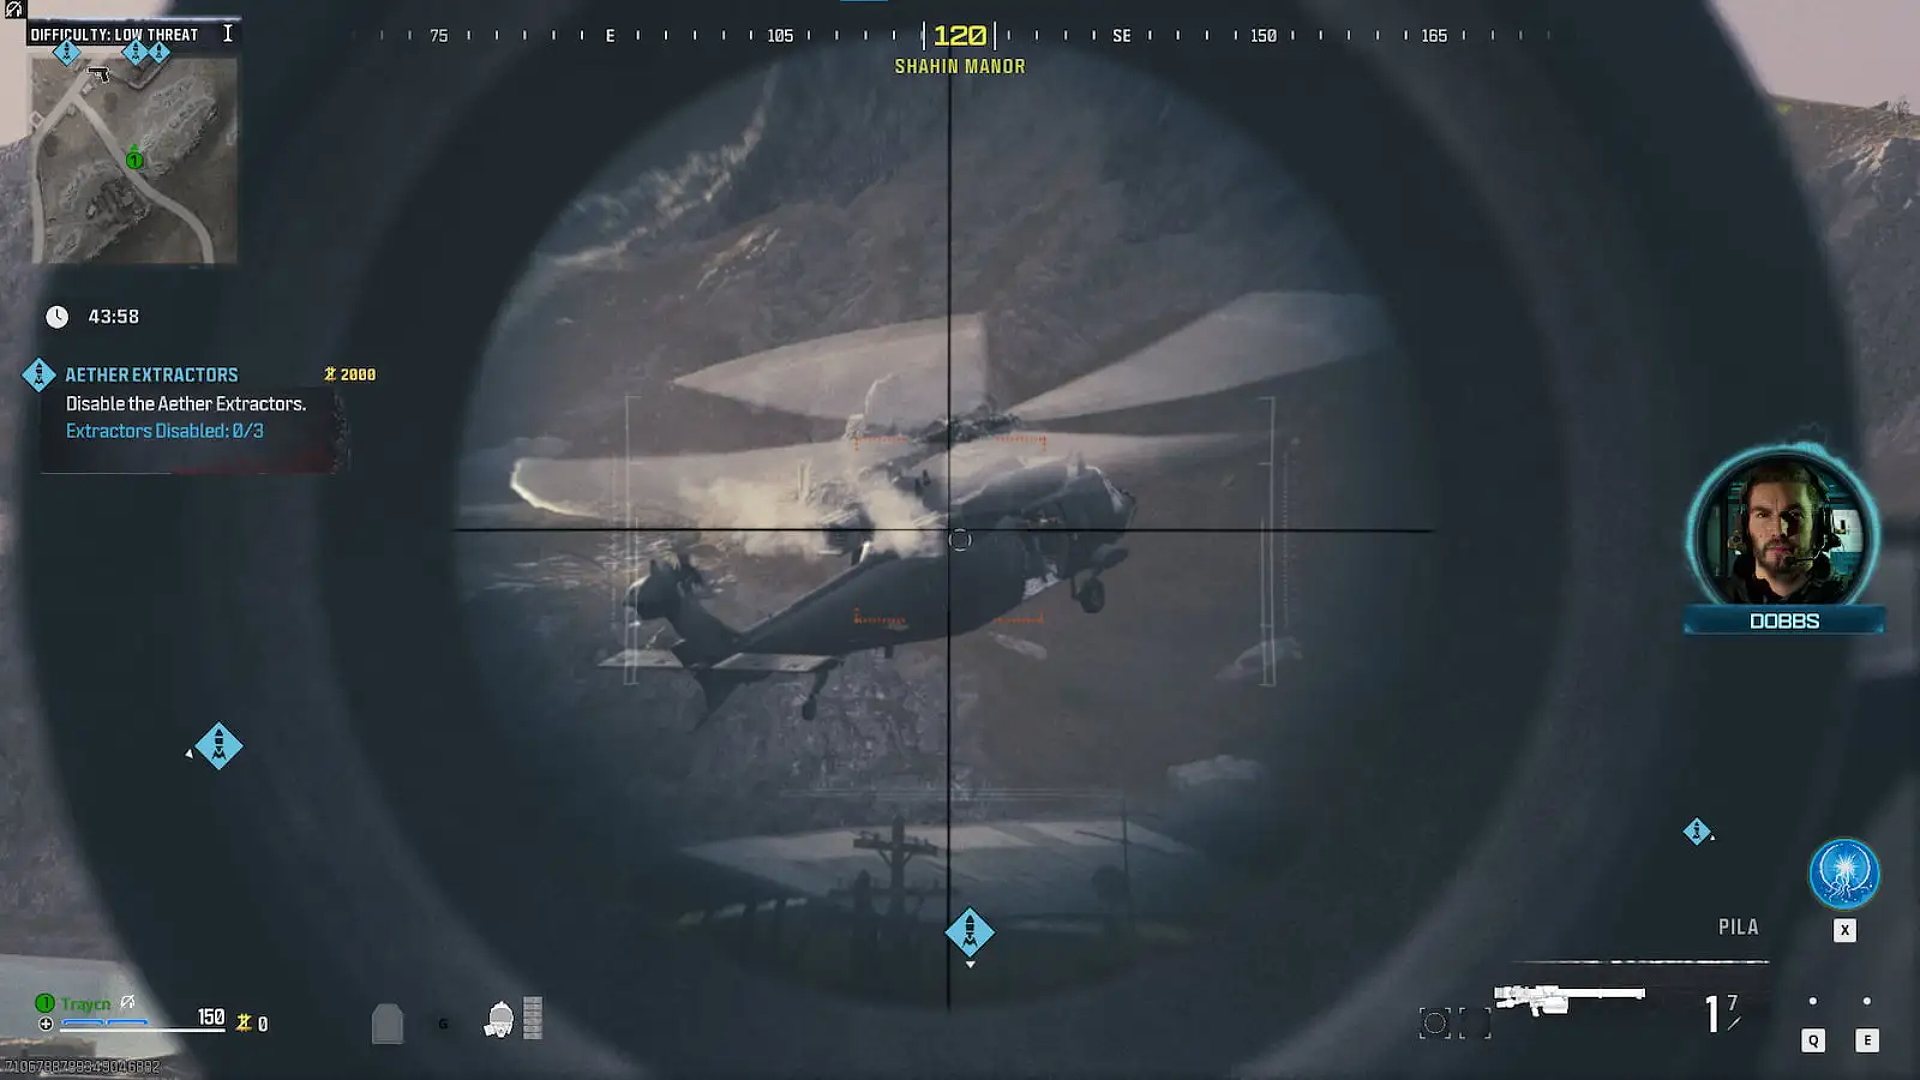 A reinforcement helicopter being shot at in MW3 Zombies